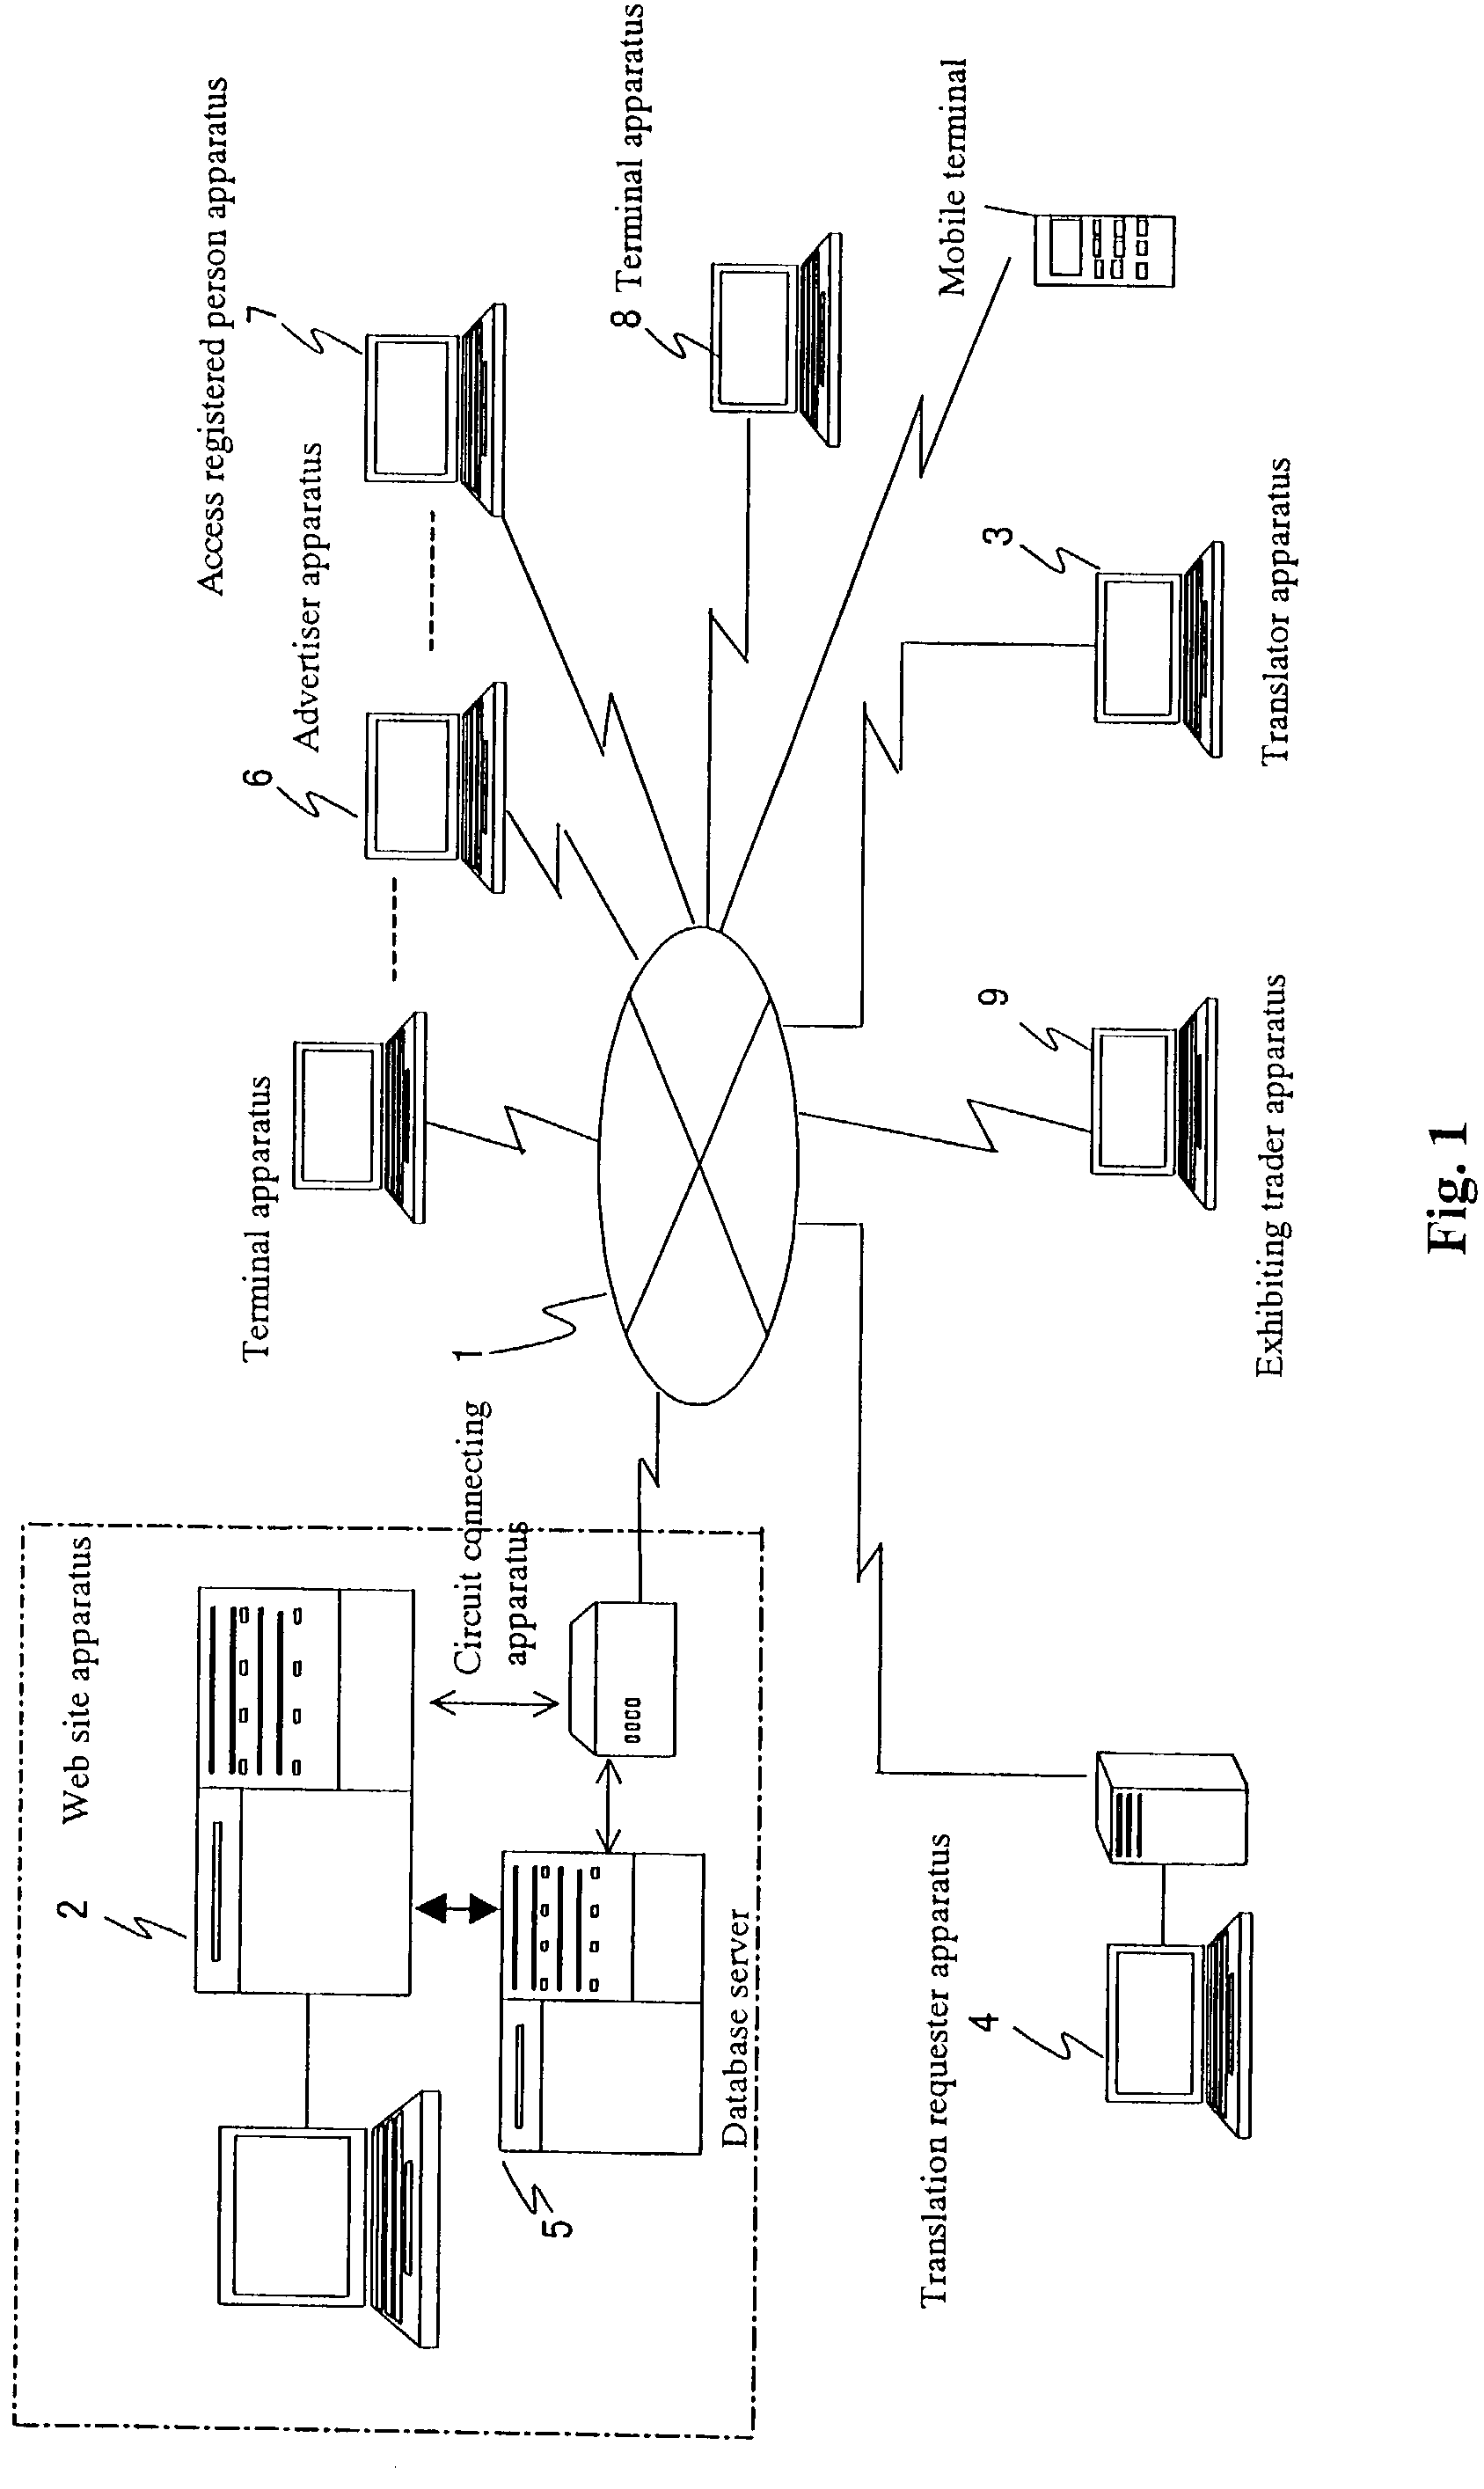 Method for offering multilingual information translated in many languages through a communication network